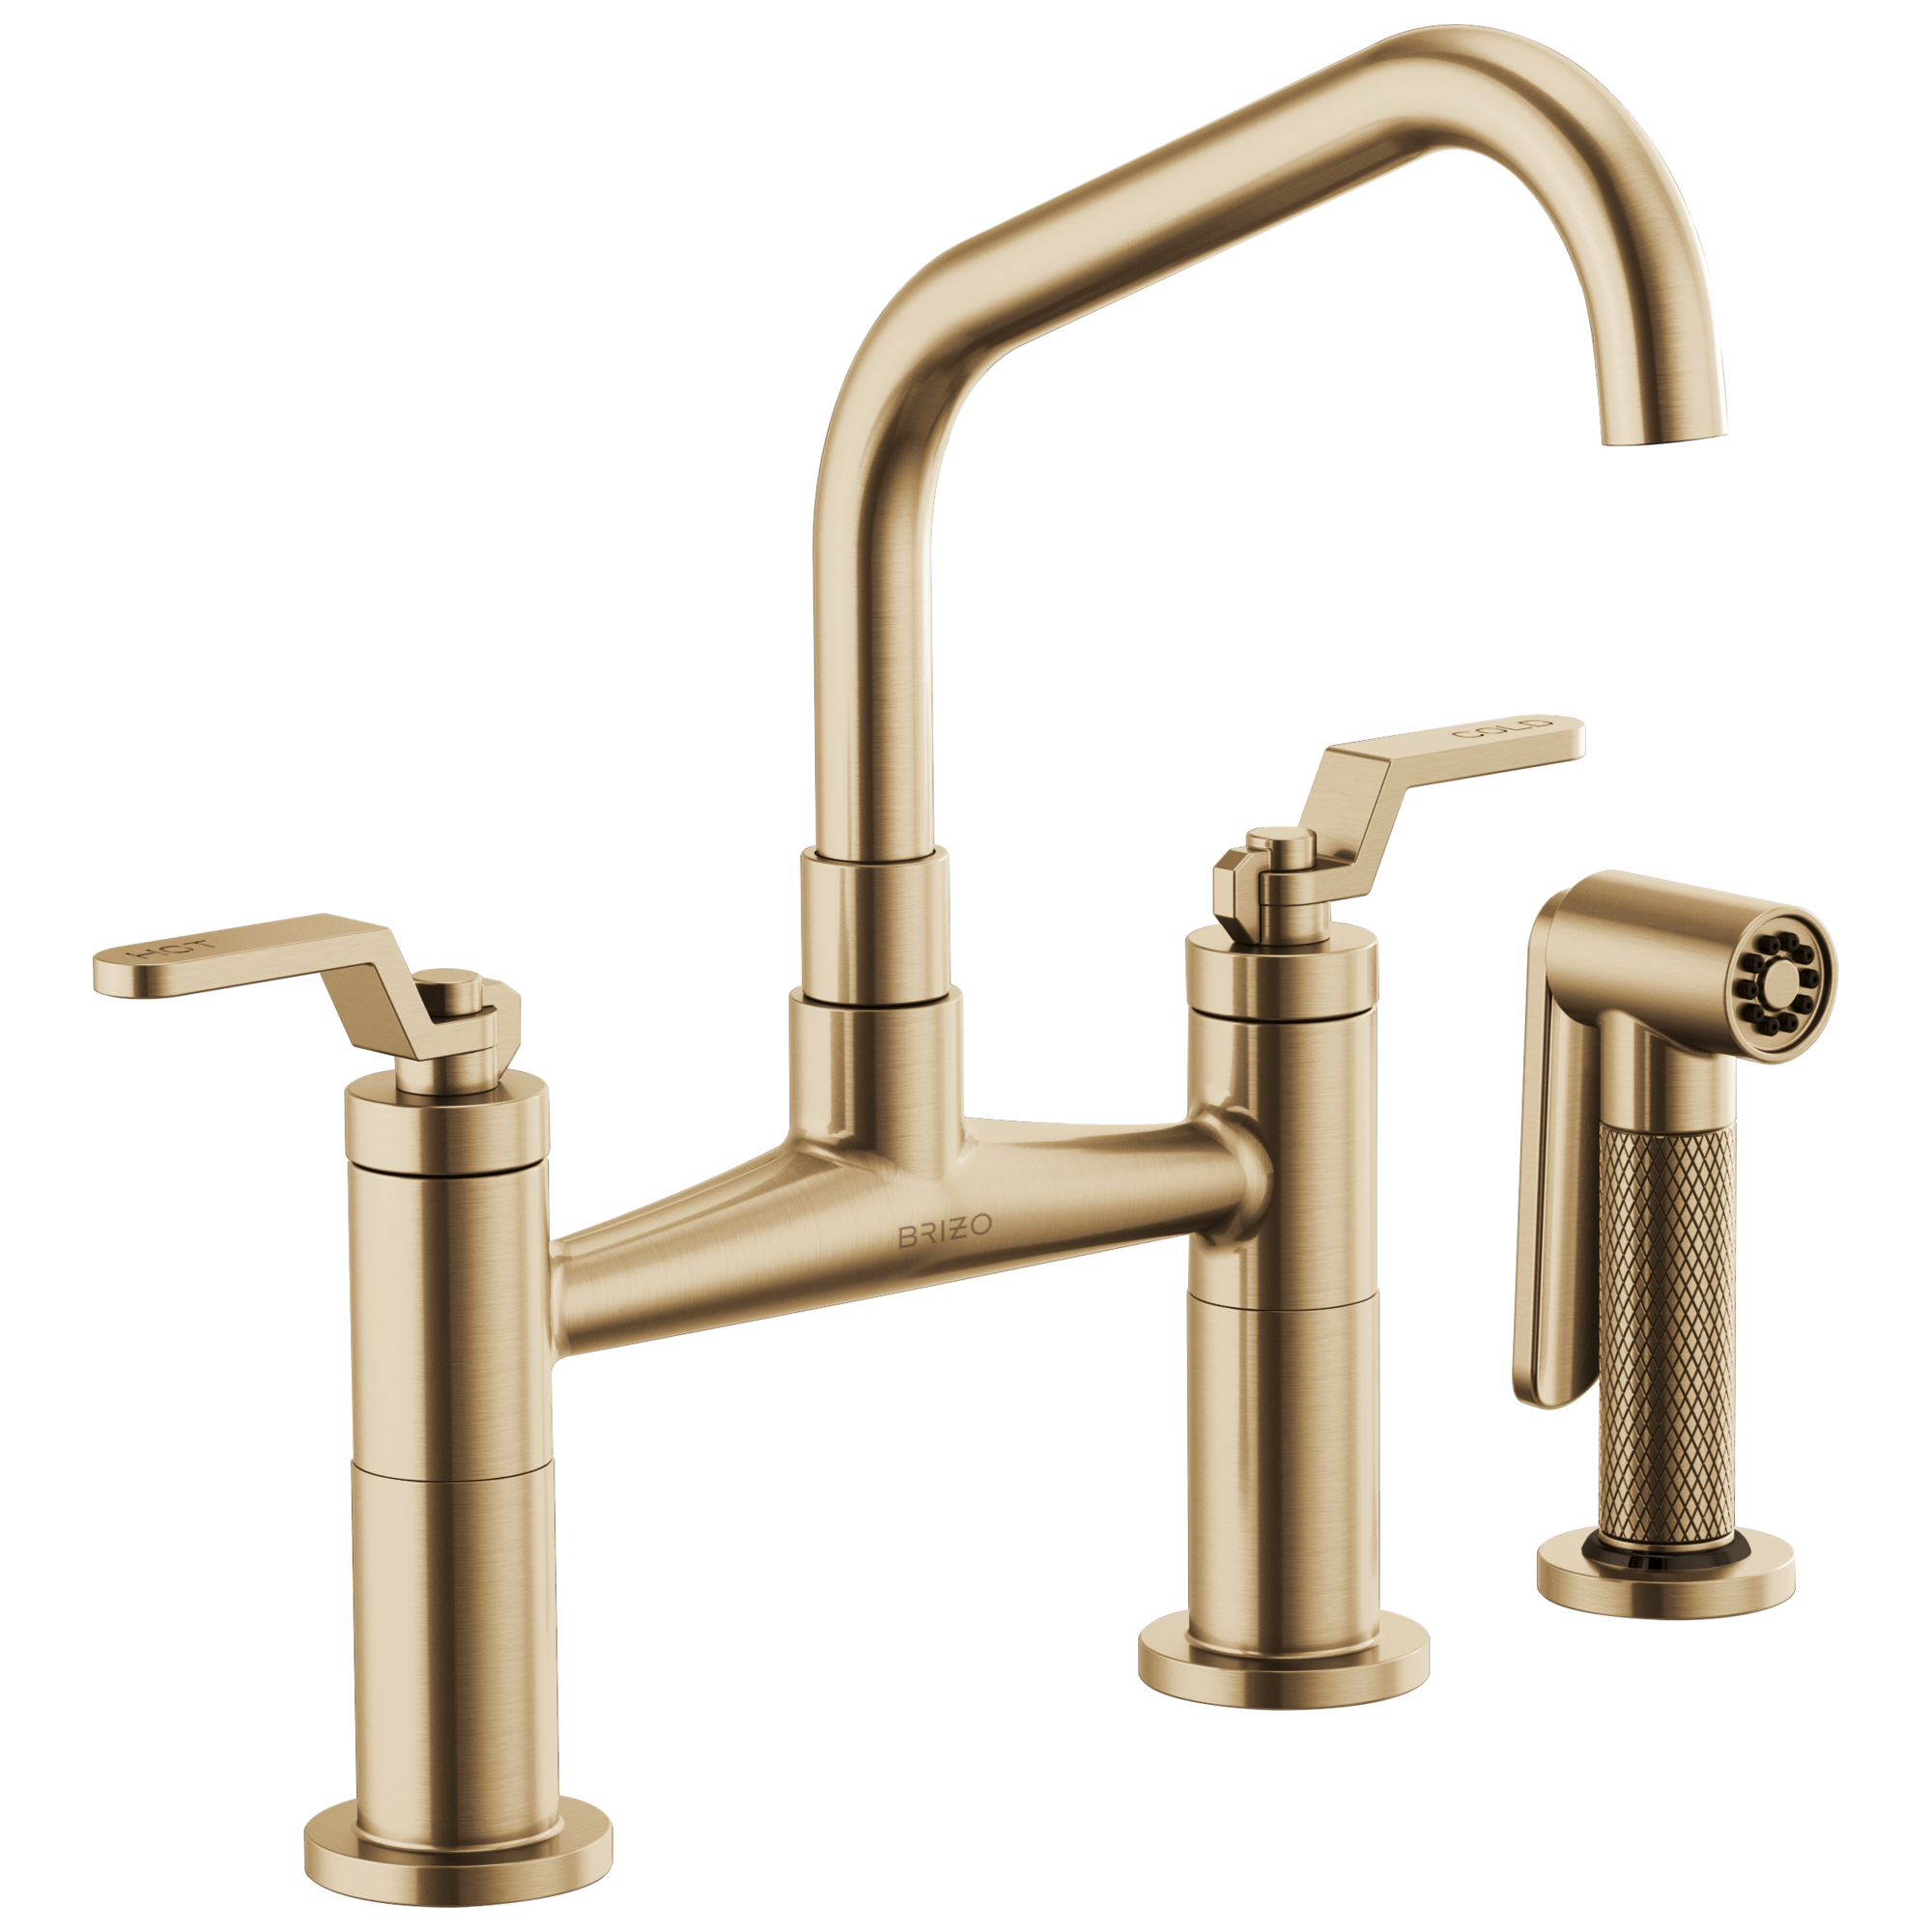 Brizo Litze: Bridge Faucet with Angled Spout and Industrial Handle